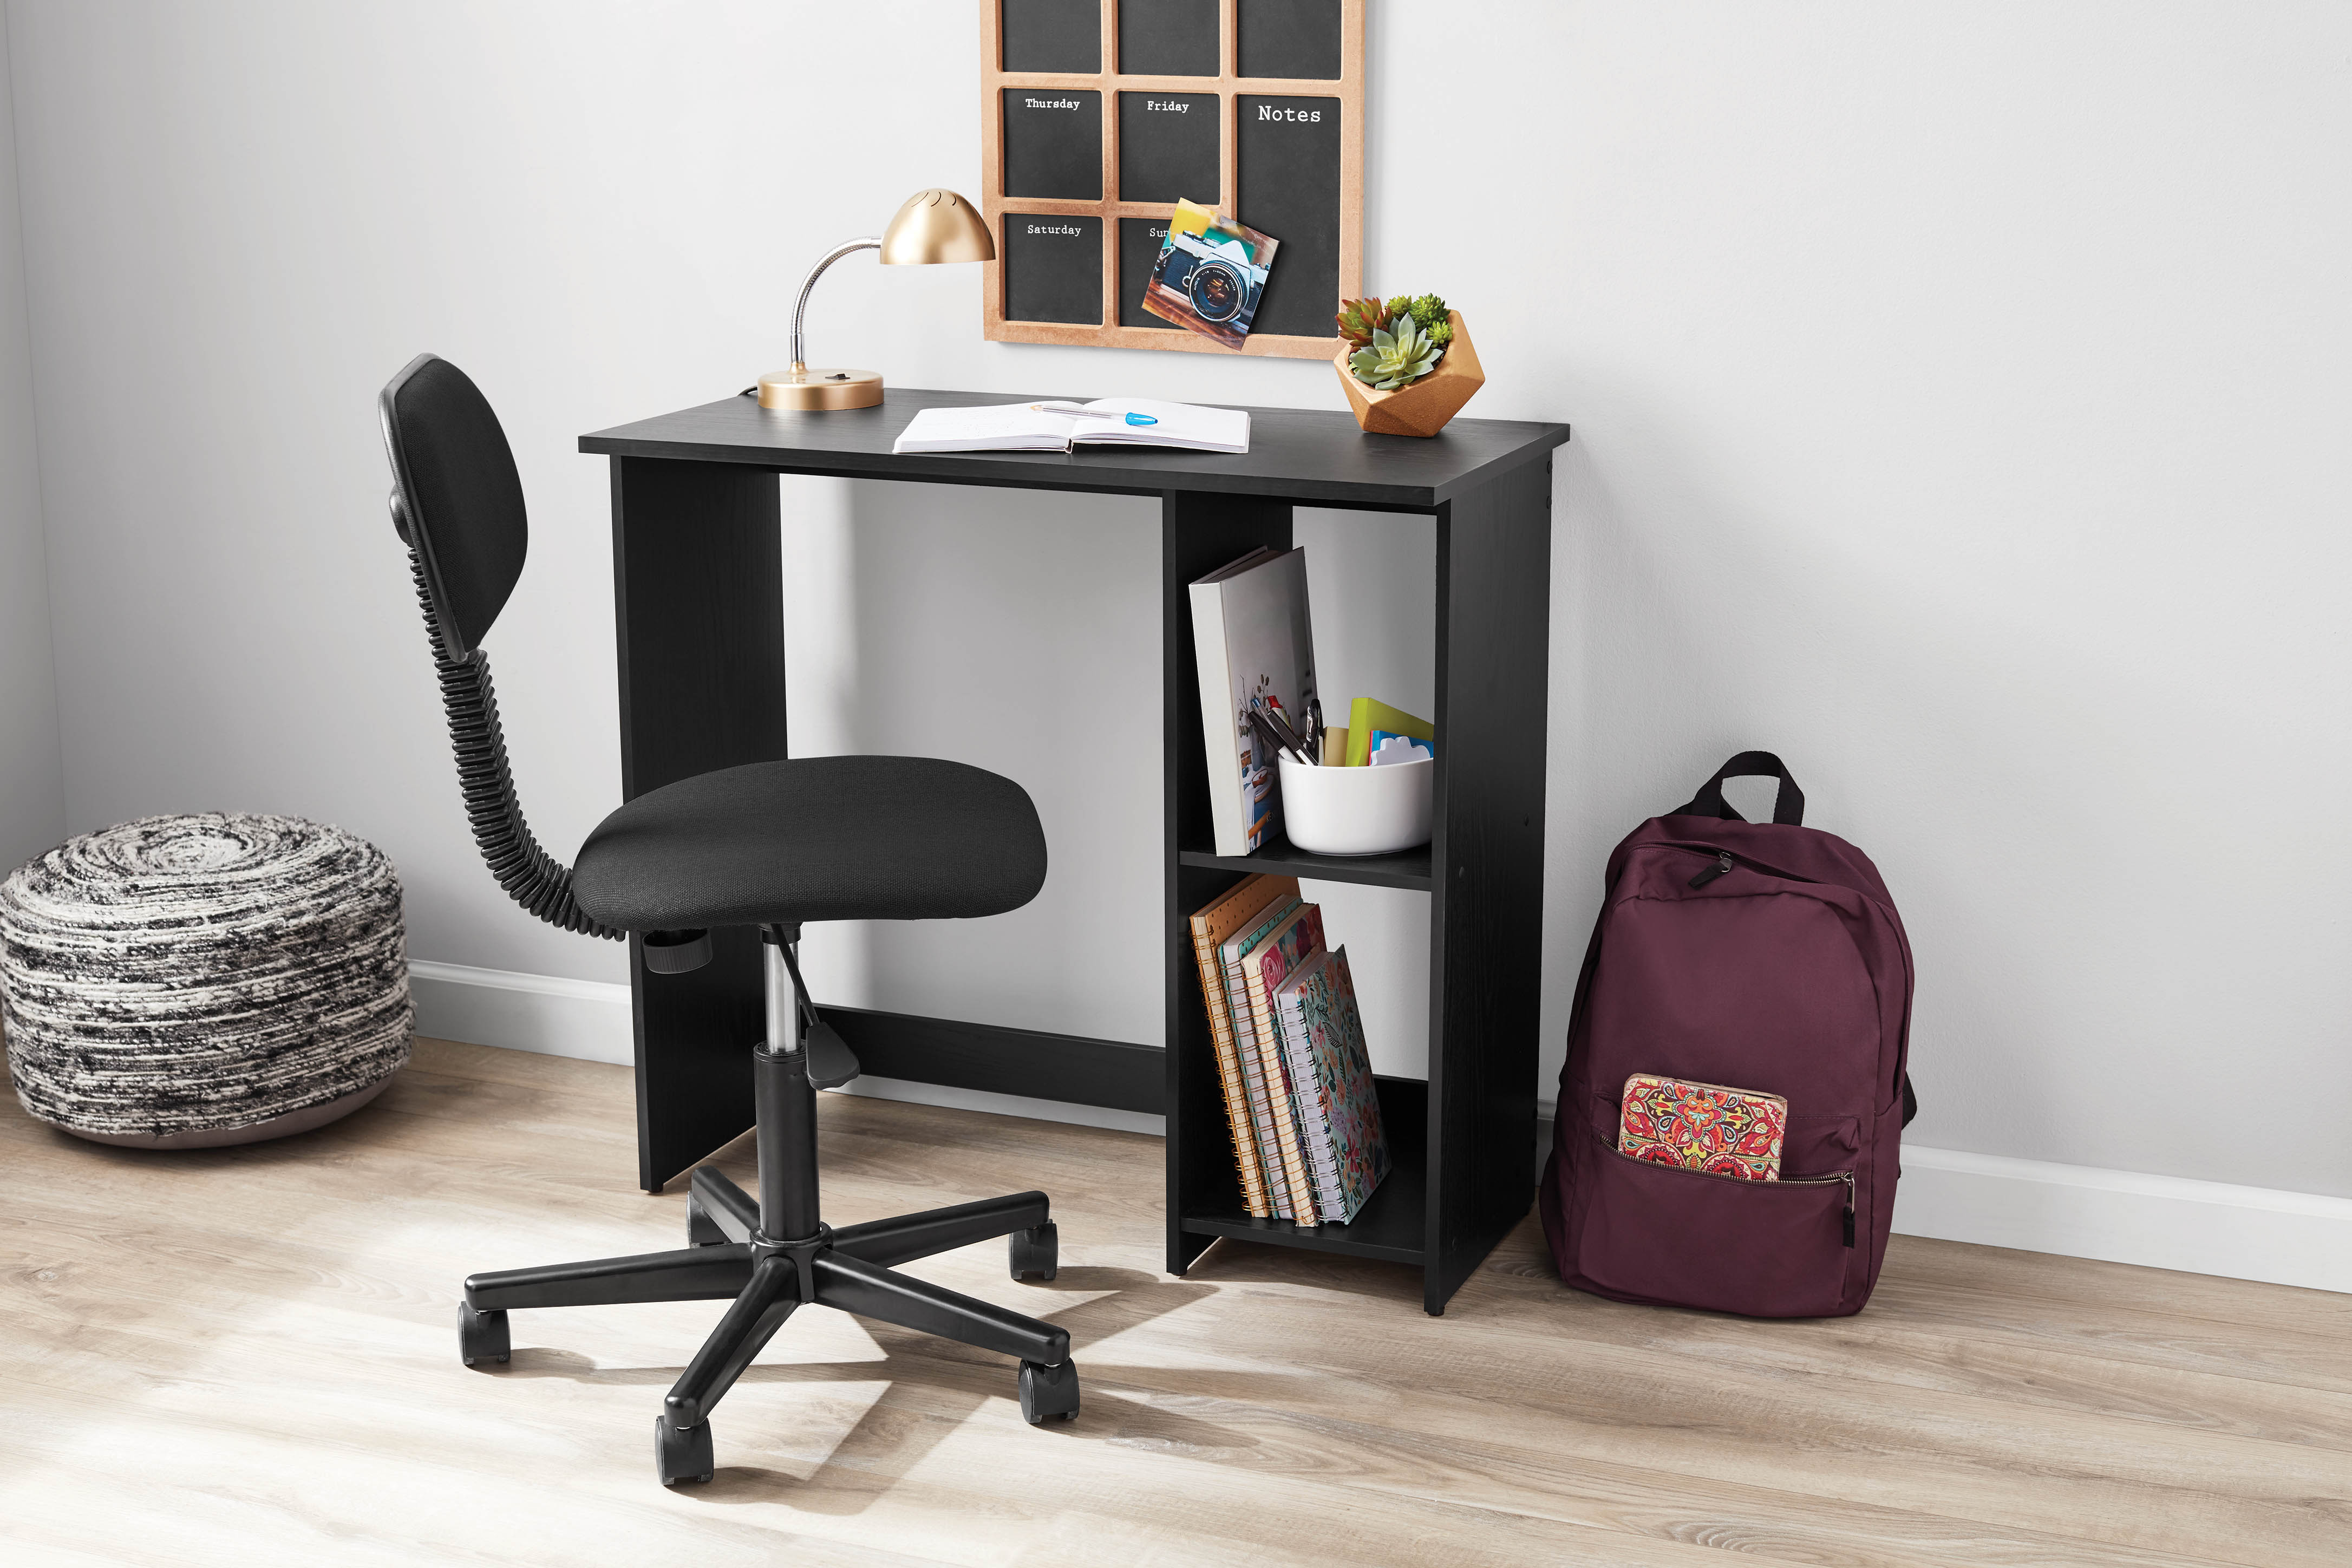 Mainstays Small Space Writing Desk with 2 Shelves, True Black Oak Finish - image 2 of 8